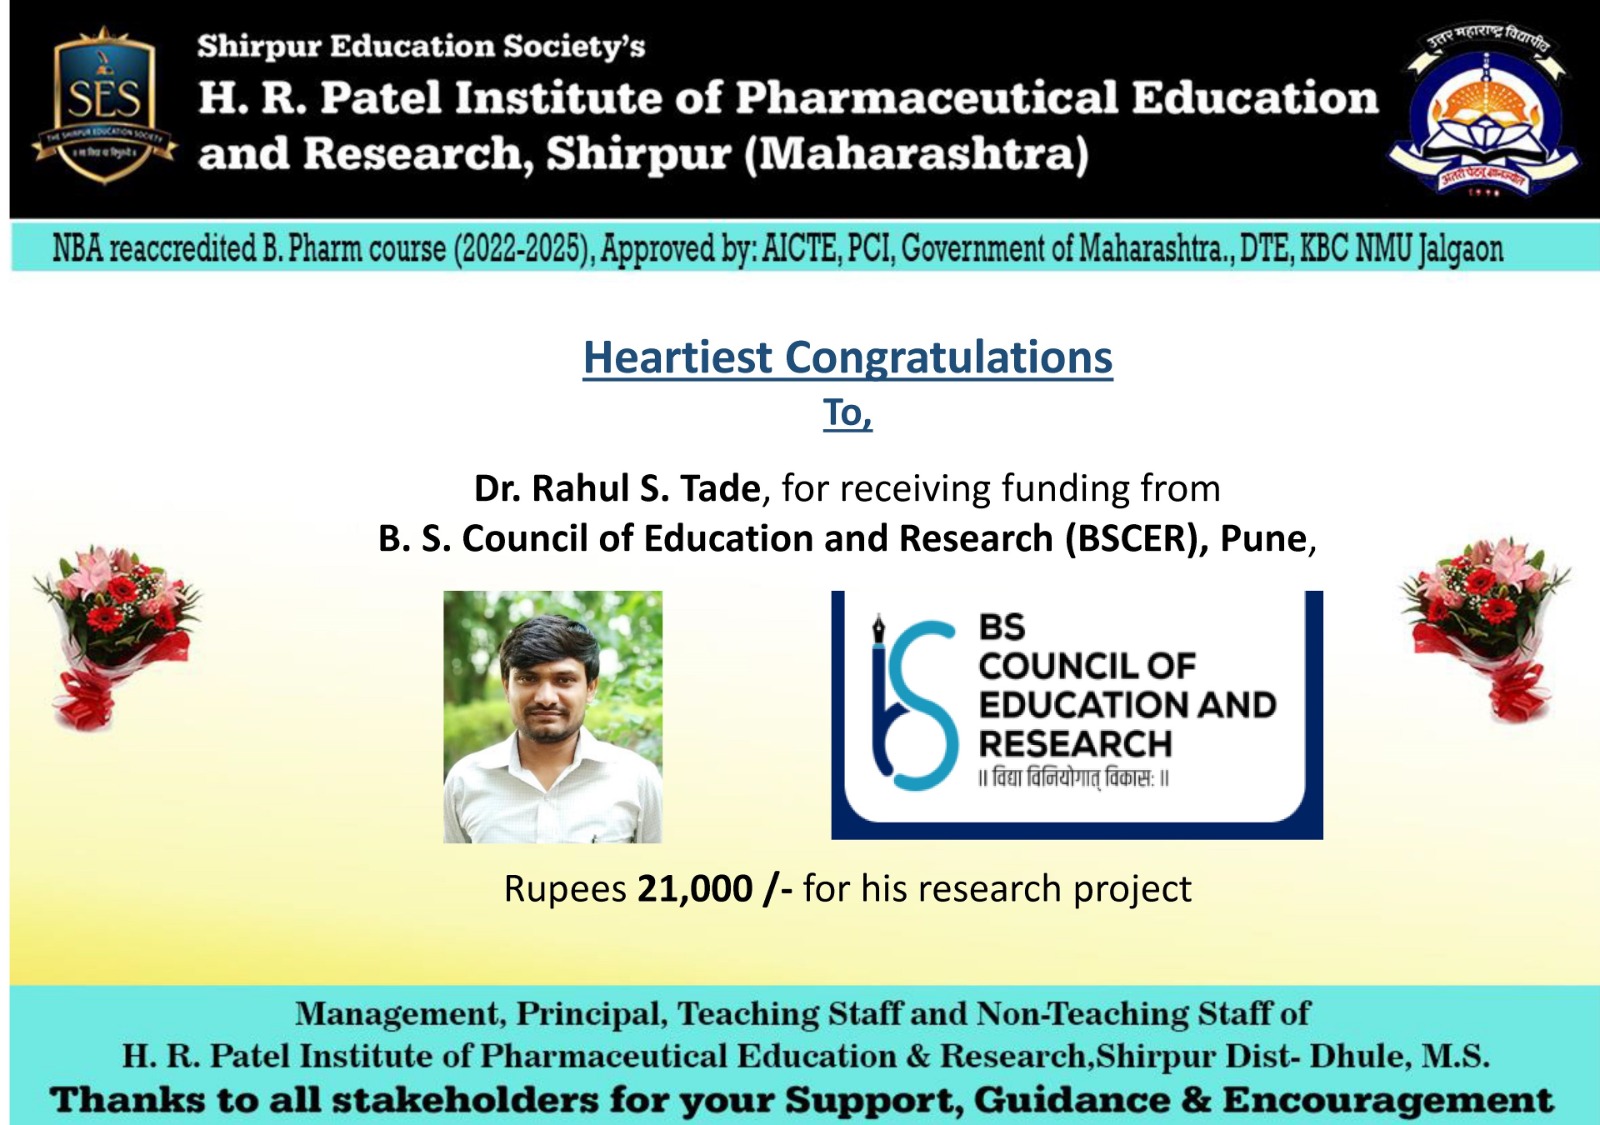 Dr. R. S. Tade has been awarded a research fund of rupees 21,000 /- from the BSCER, Pune,